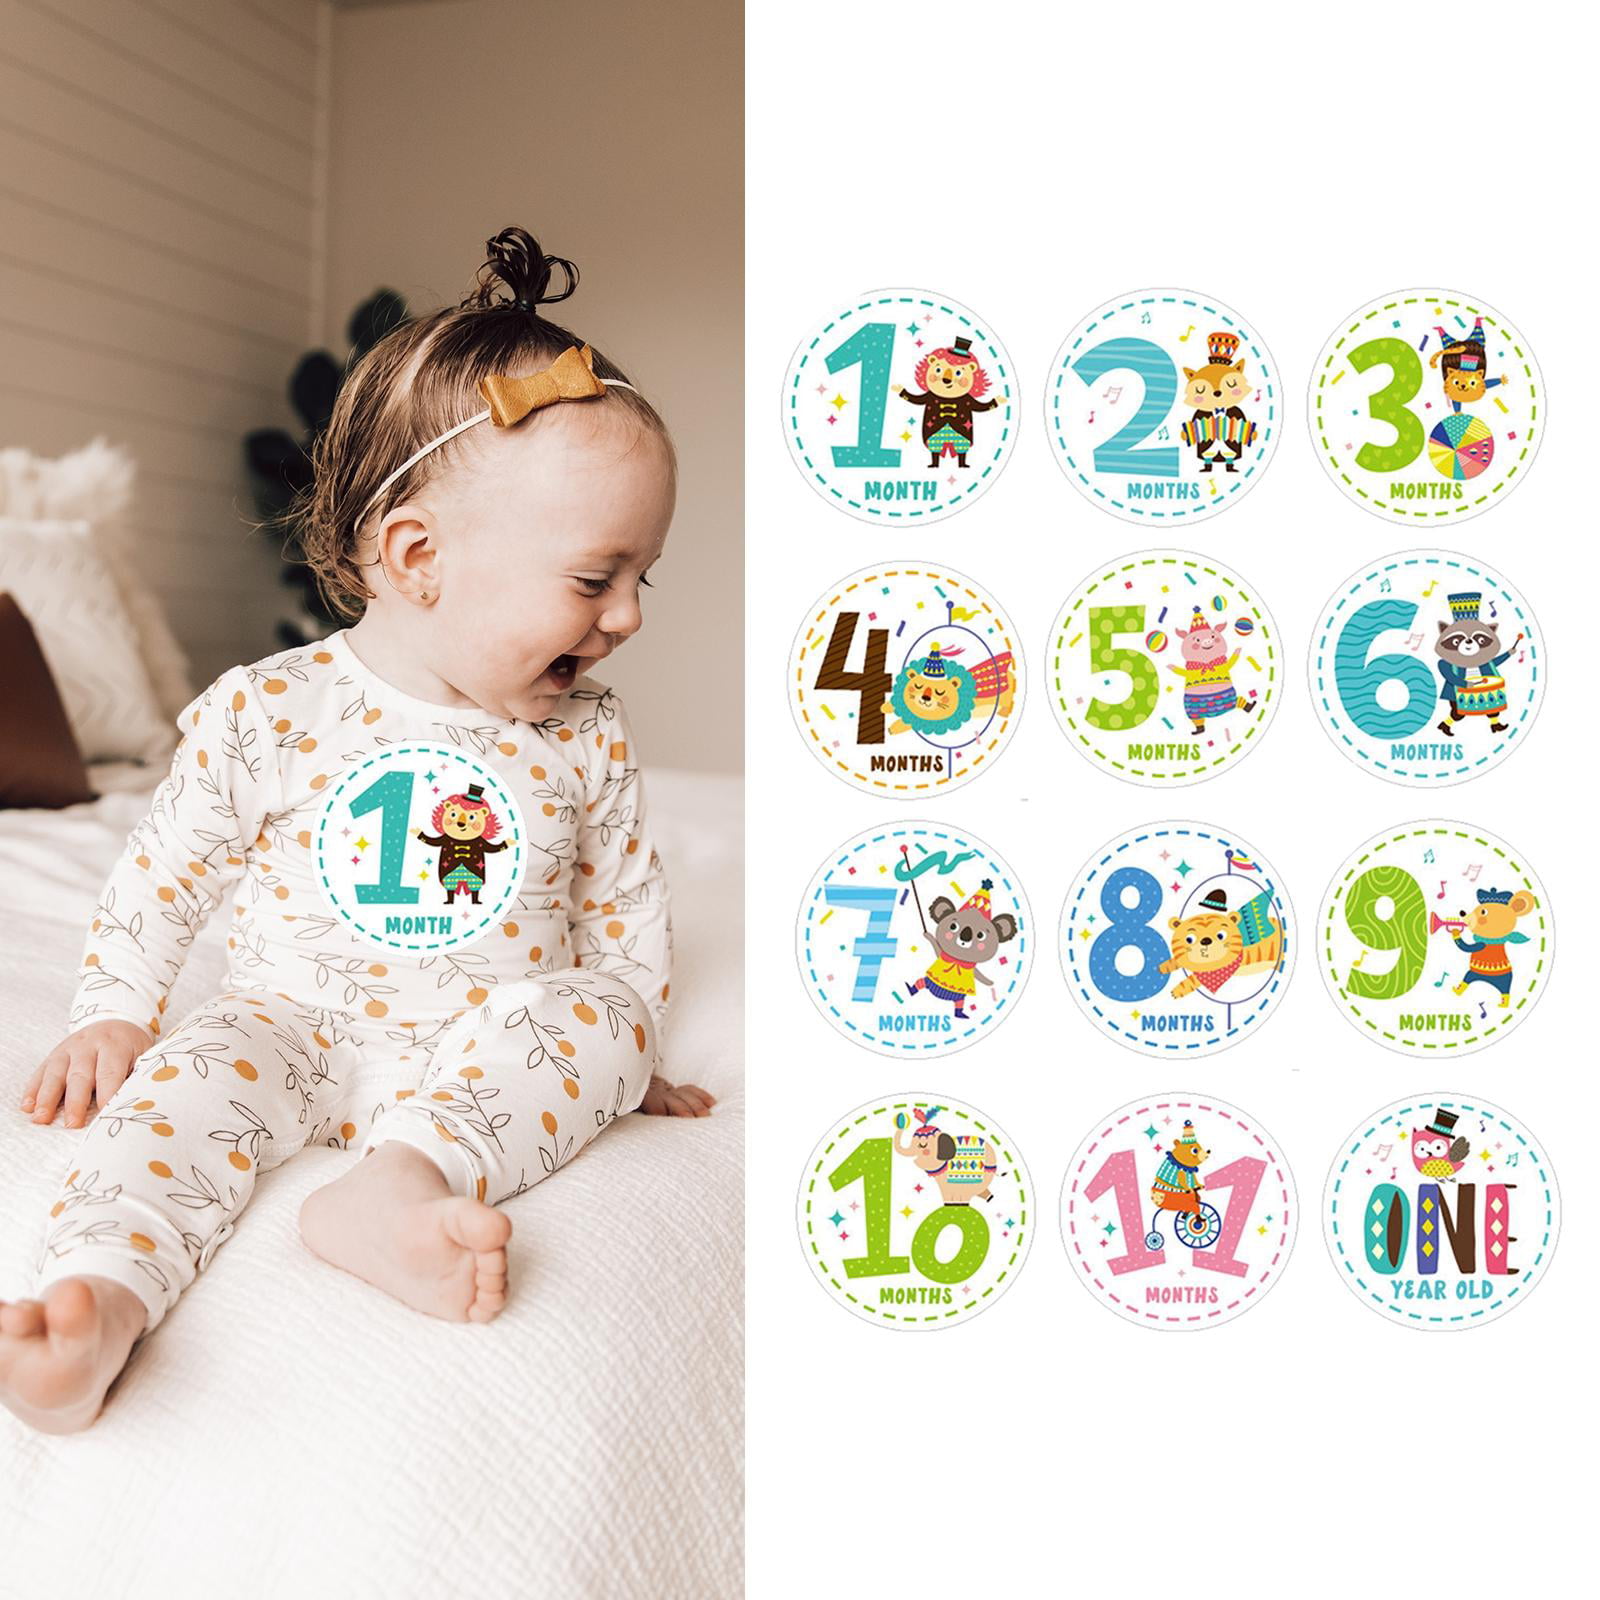  Months in Motion Baby Monthly Necktie Stickers - Baby